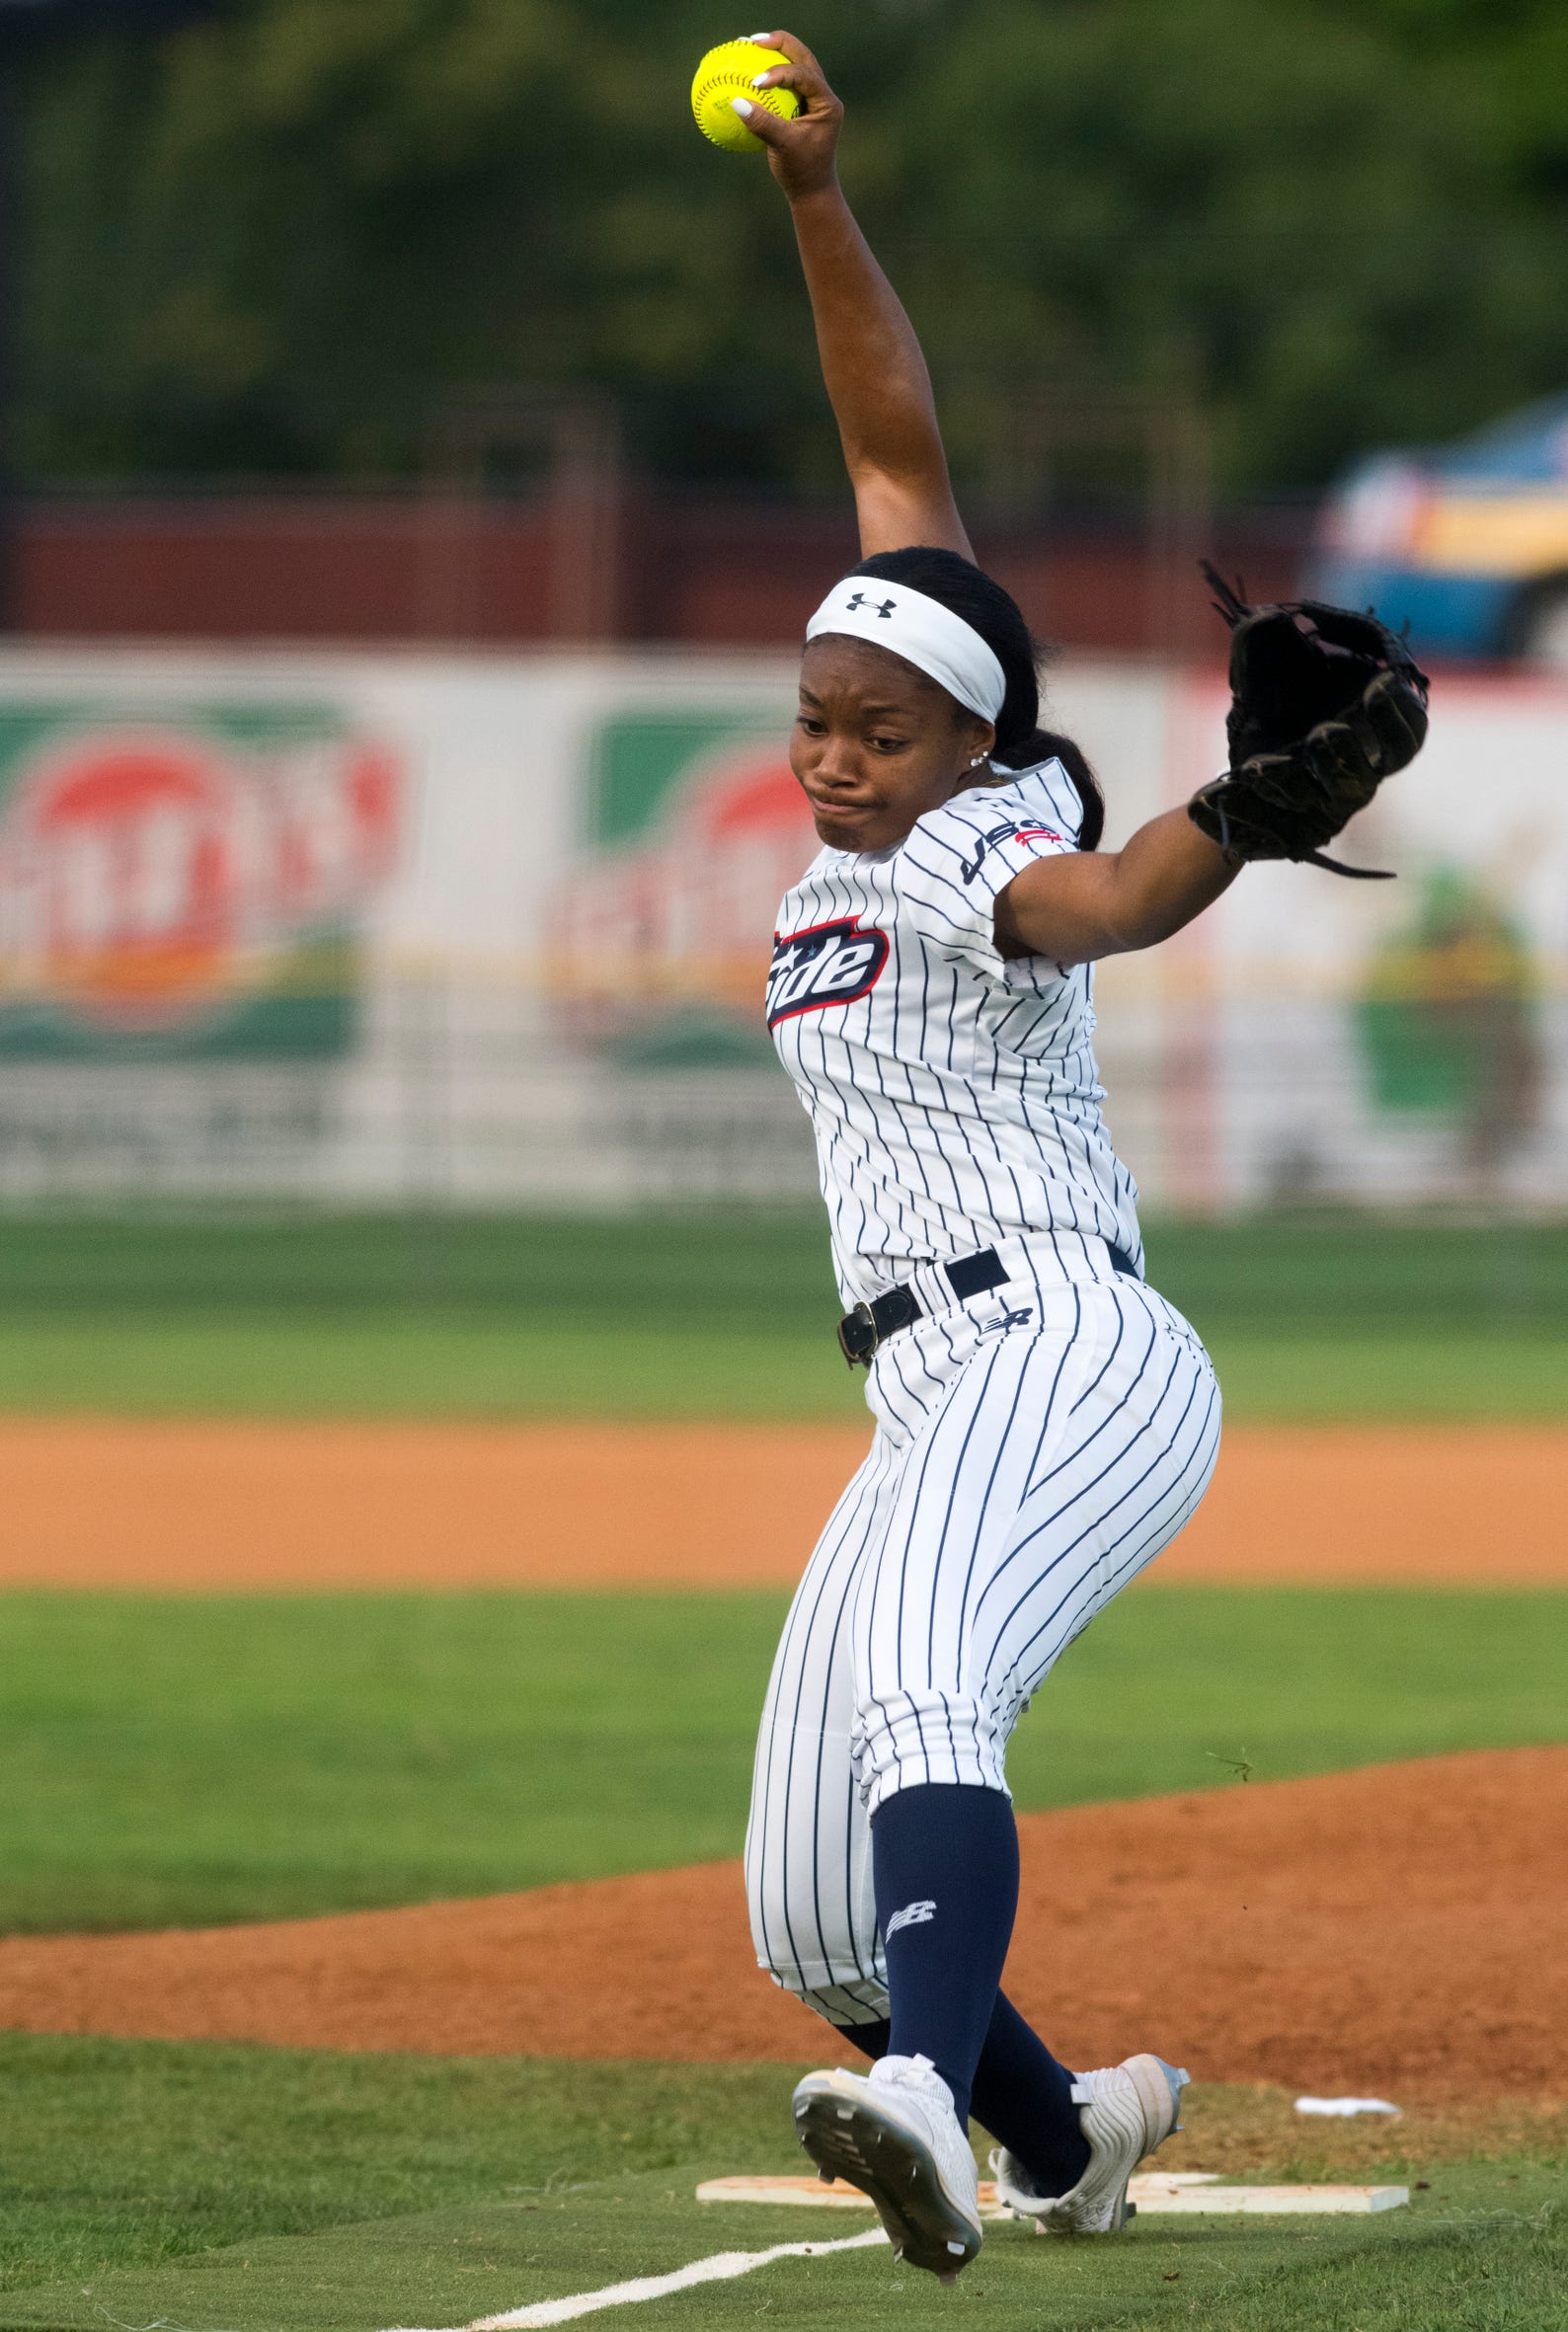 USSSA Pride’s Odicci Alexander (1) pitches as the USSSA Pride takes on Team Florida in an exhibition game at Bosse Field in Evansville, Ind., Wednesday evening, July 14, 2021.